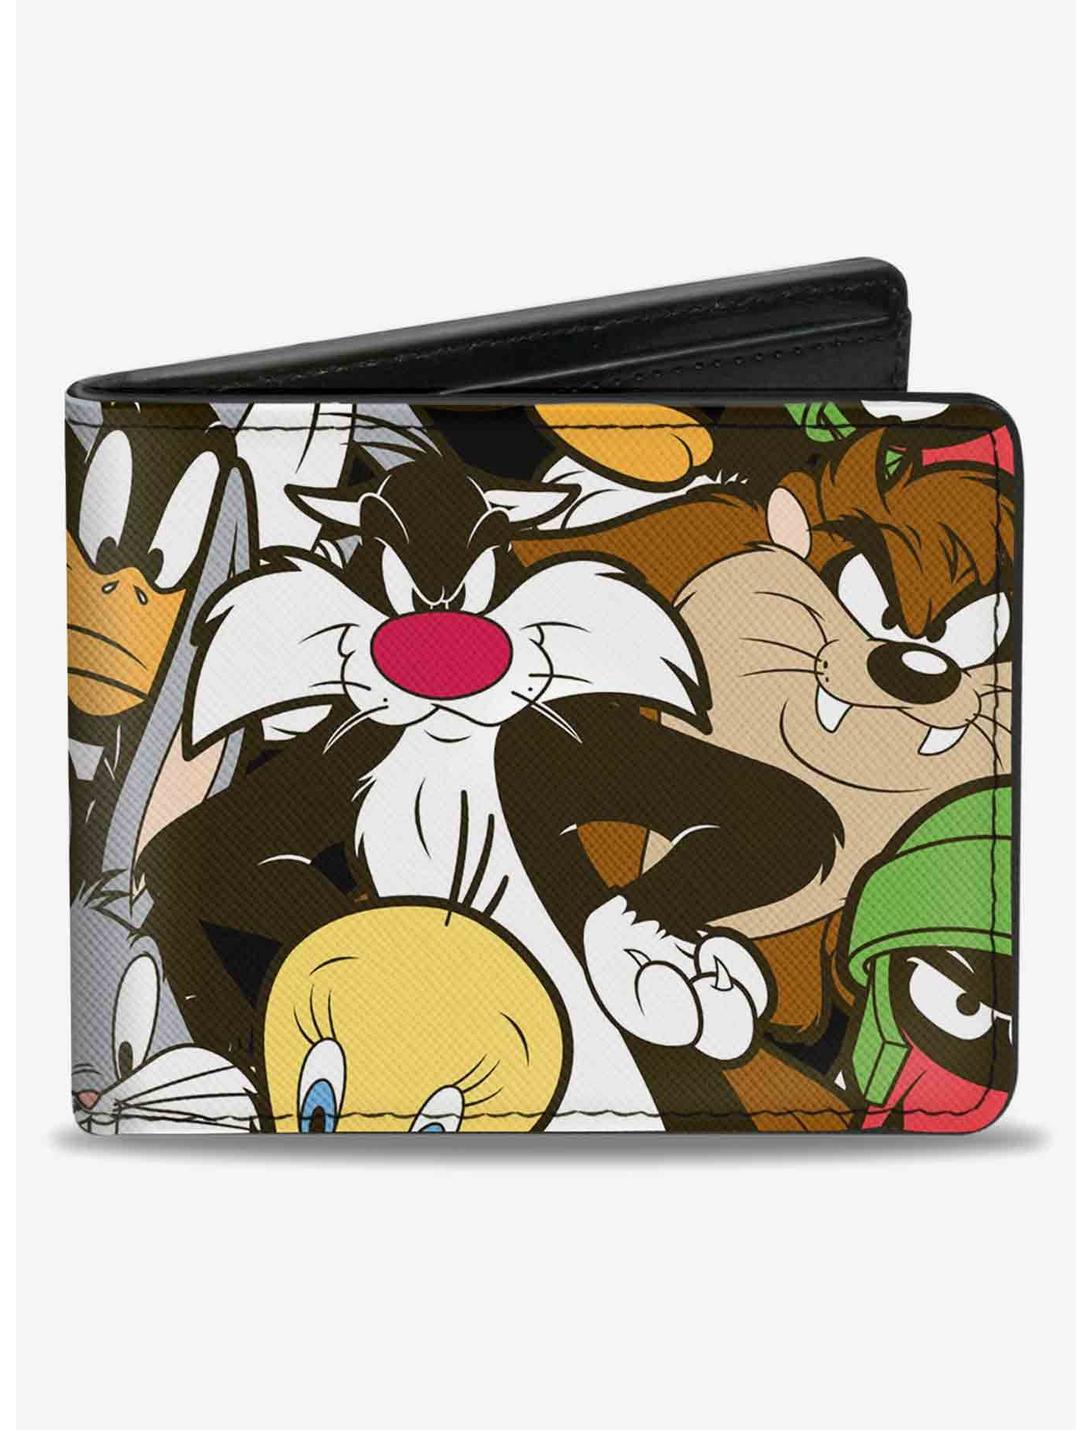 Looney Tunes 6 Character Stacked Collage Bifold Wallet, , hi-res